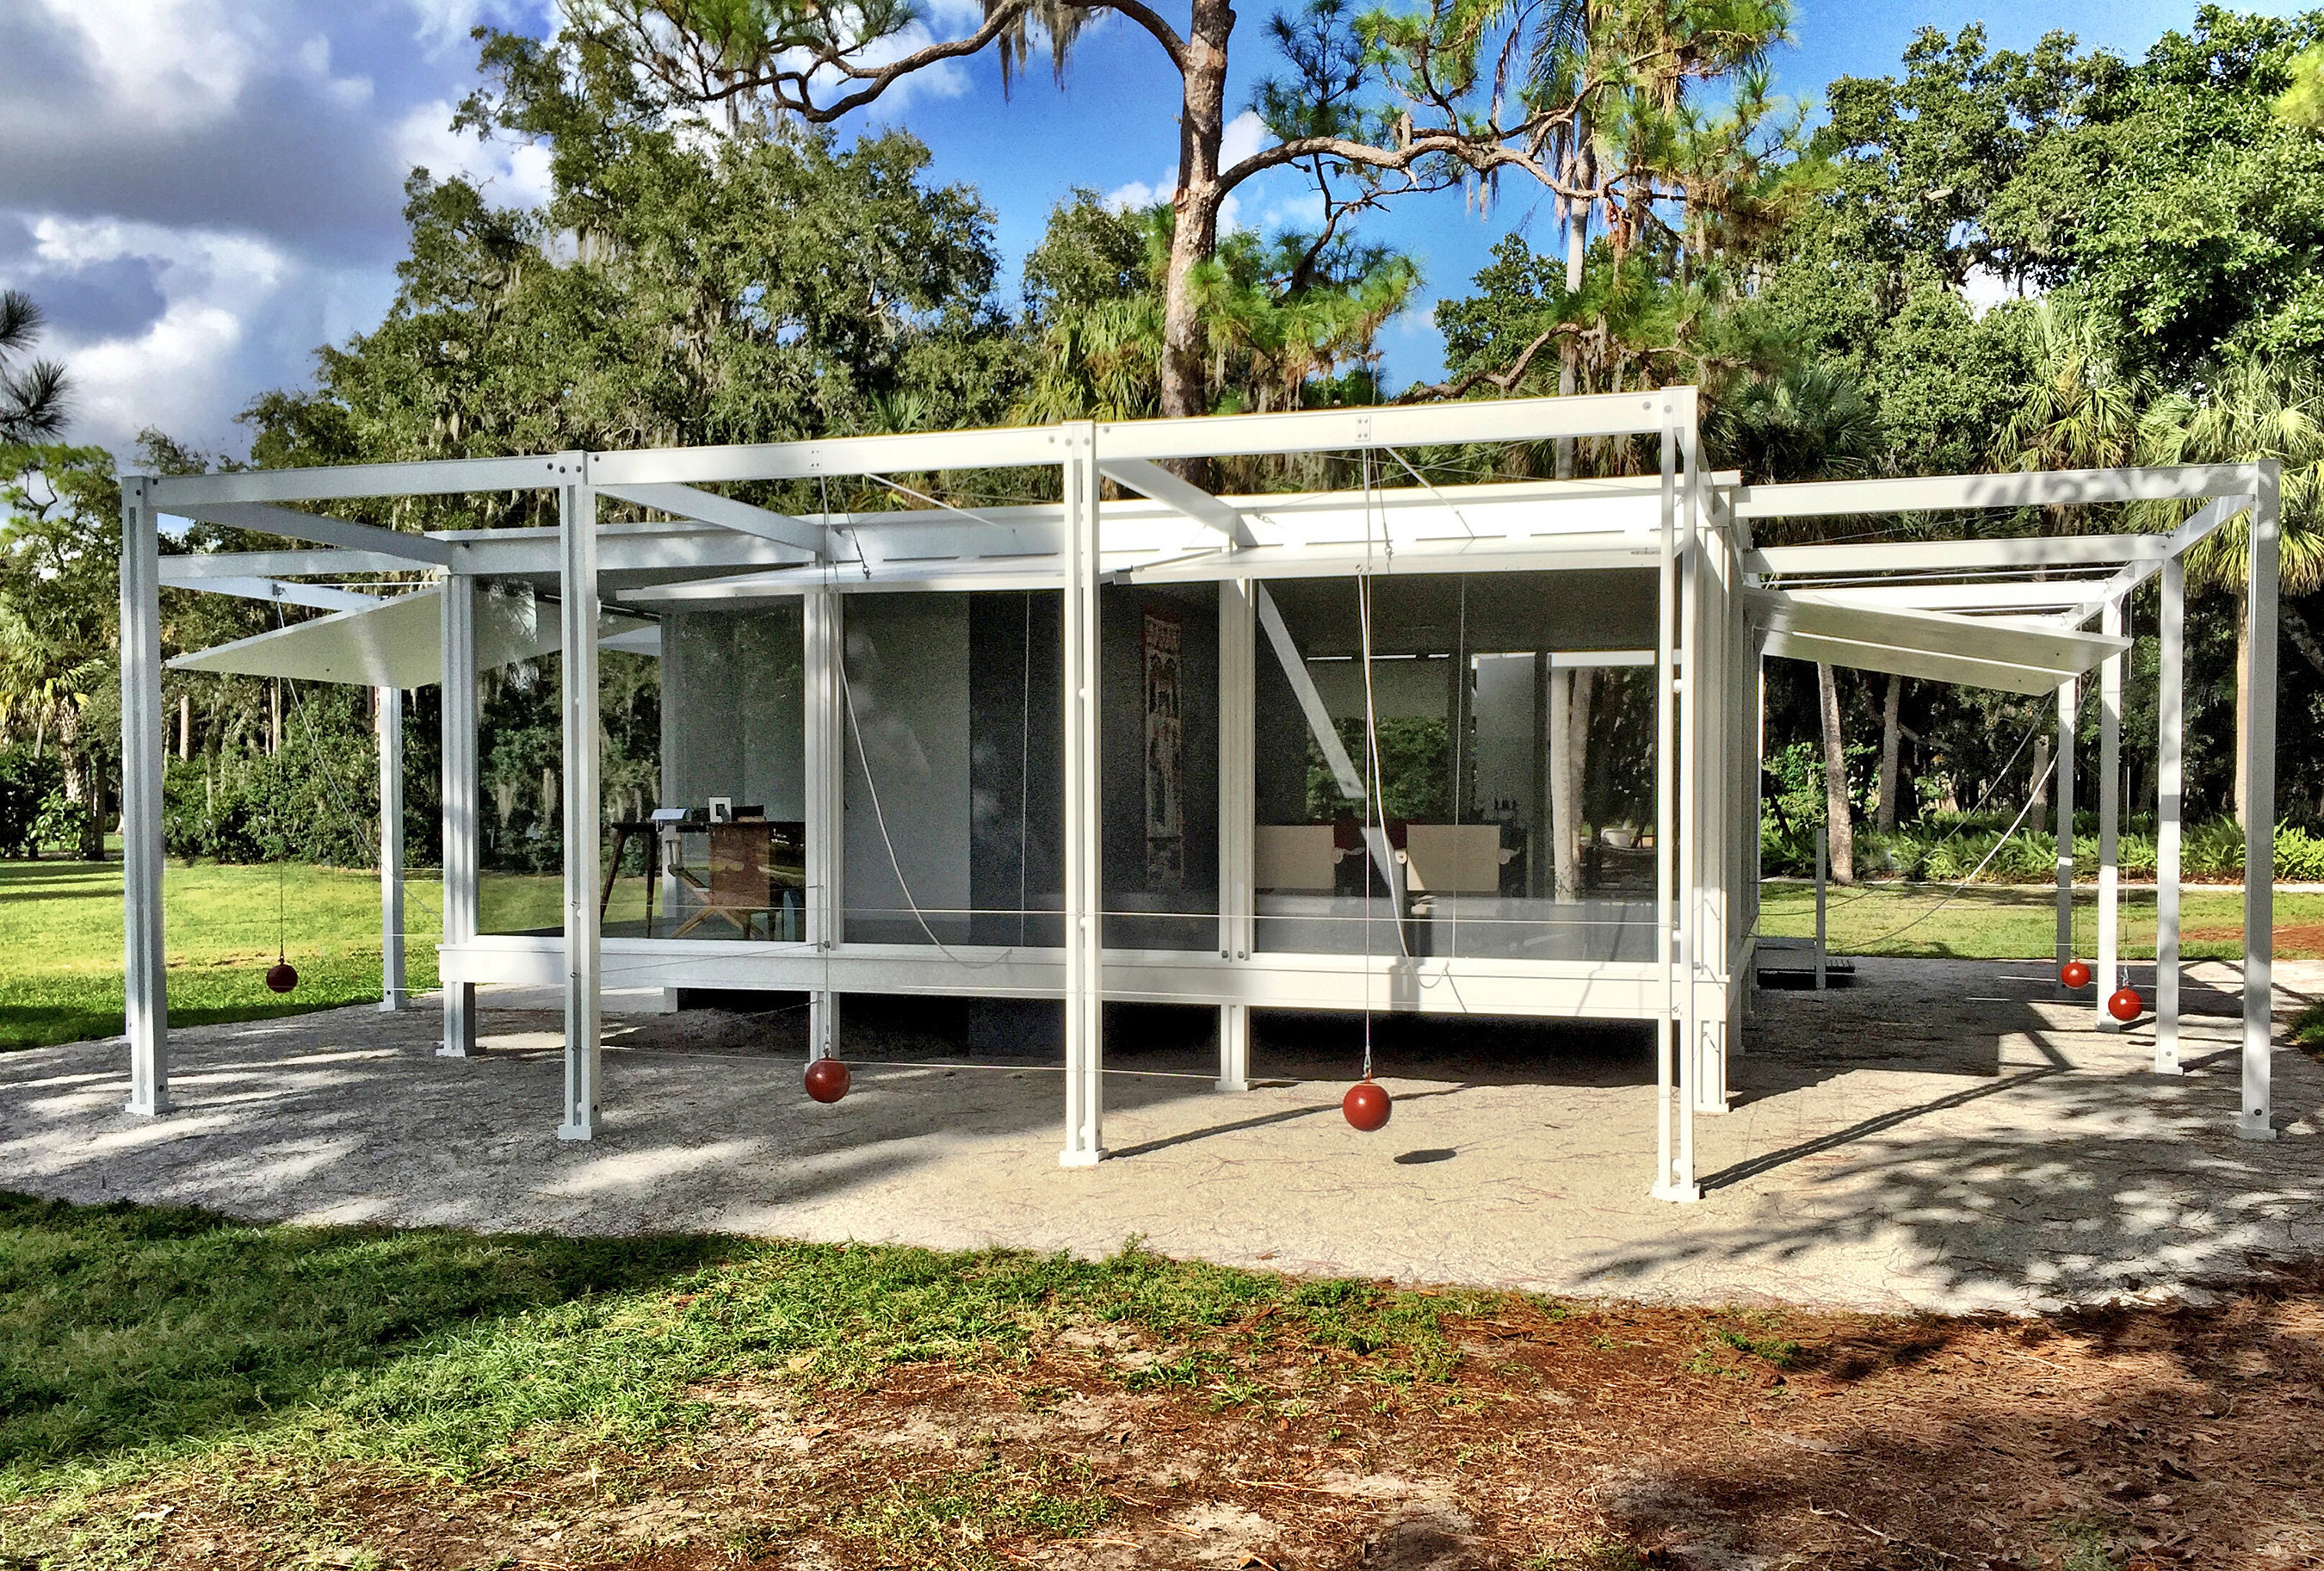 A replica of architect Paul Rudolph's 1952 Walker Guest House at The Ringling museum.